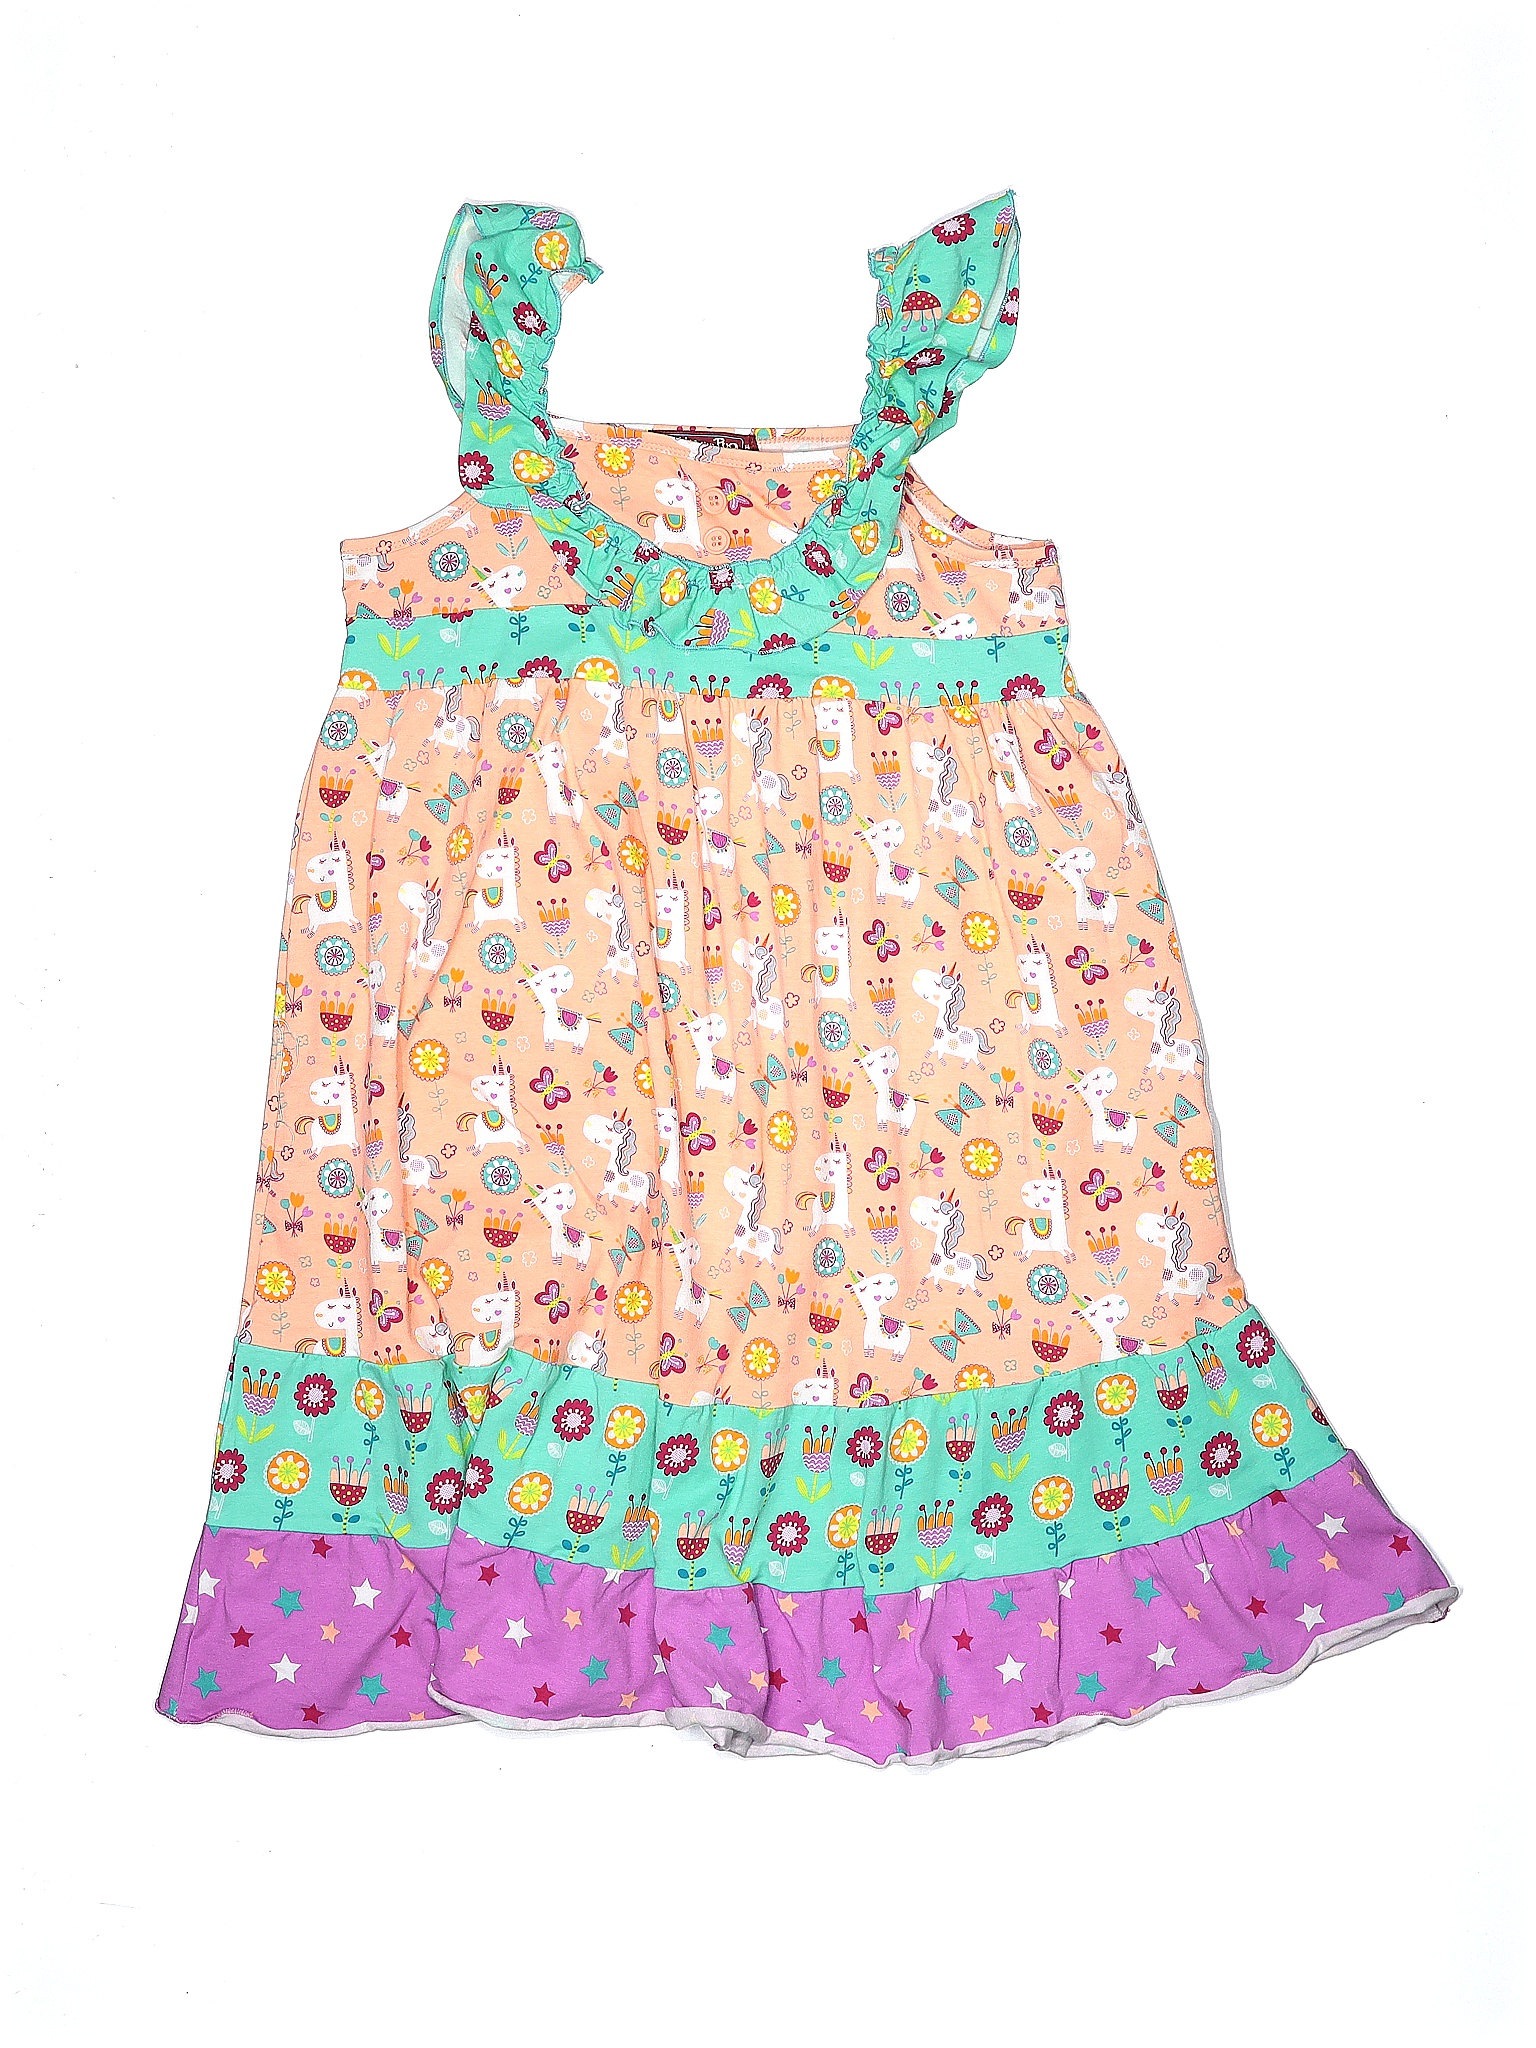 Jelly The Pug Girls' Clothing On Sale Up To 90% Off Retail | thredUP